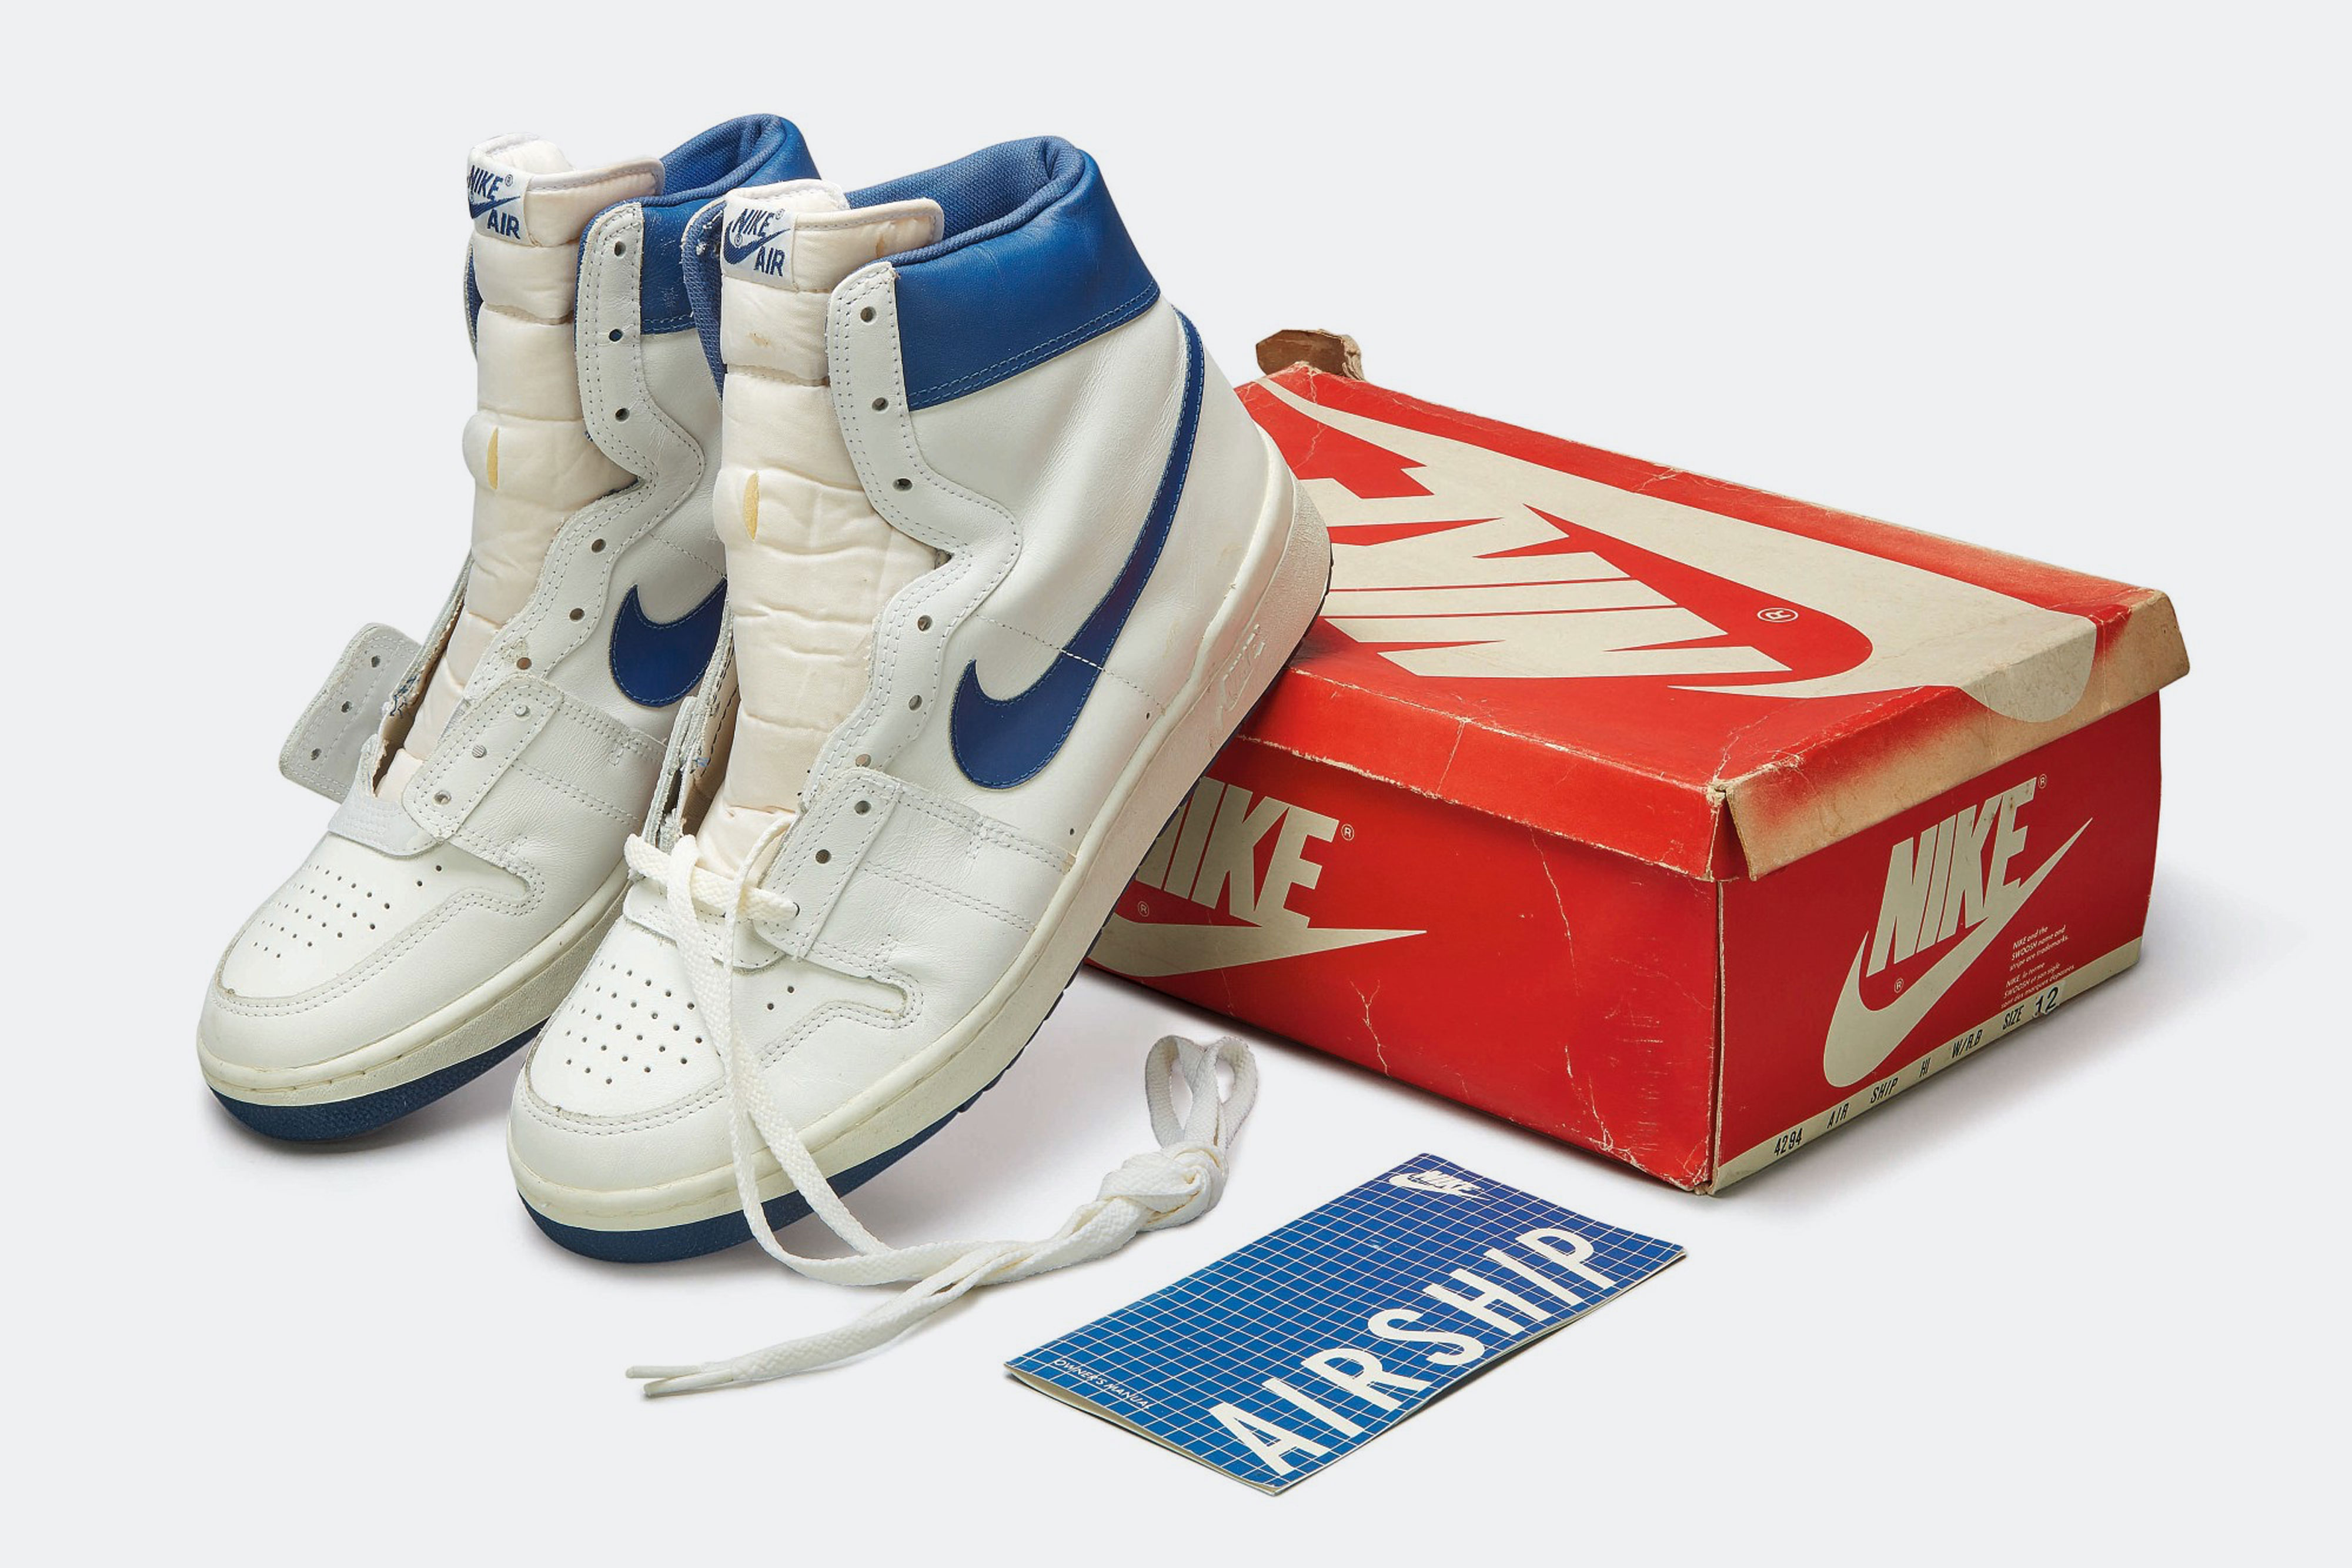 Up There Journal: Unbanned – Return of the Nike Air Ship